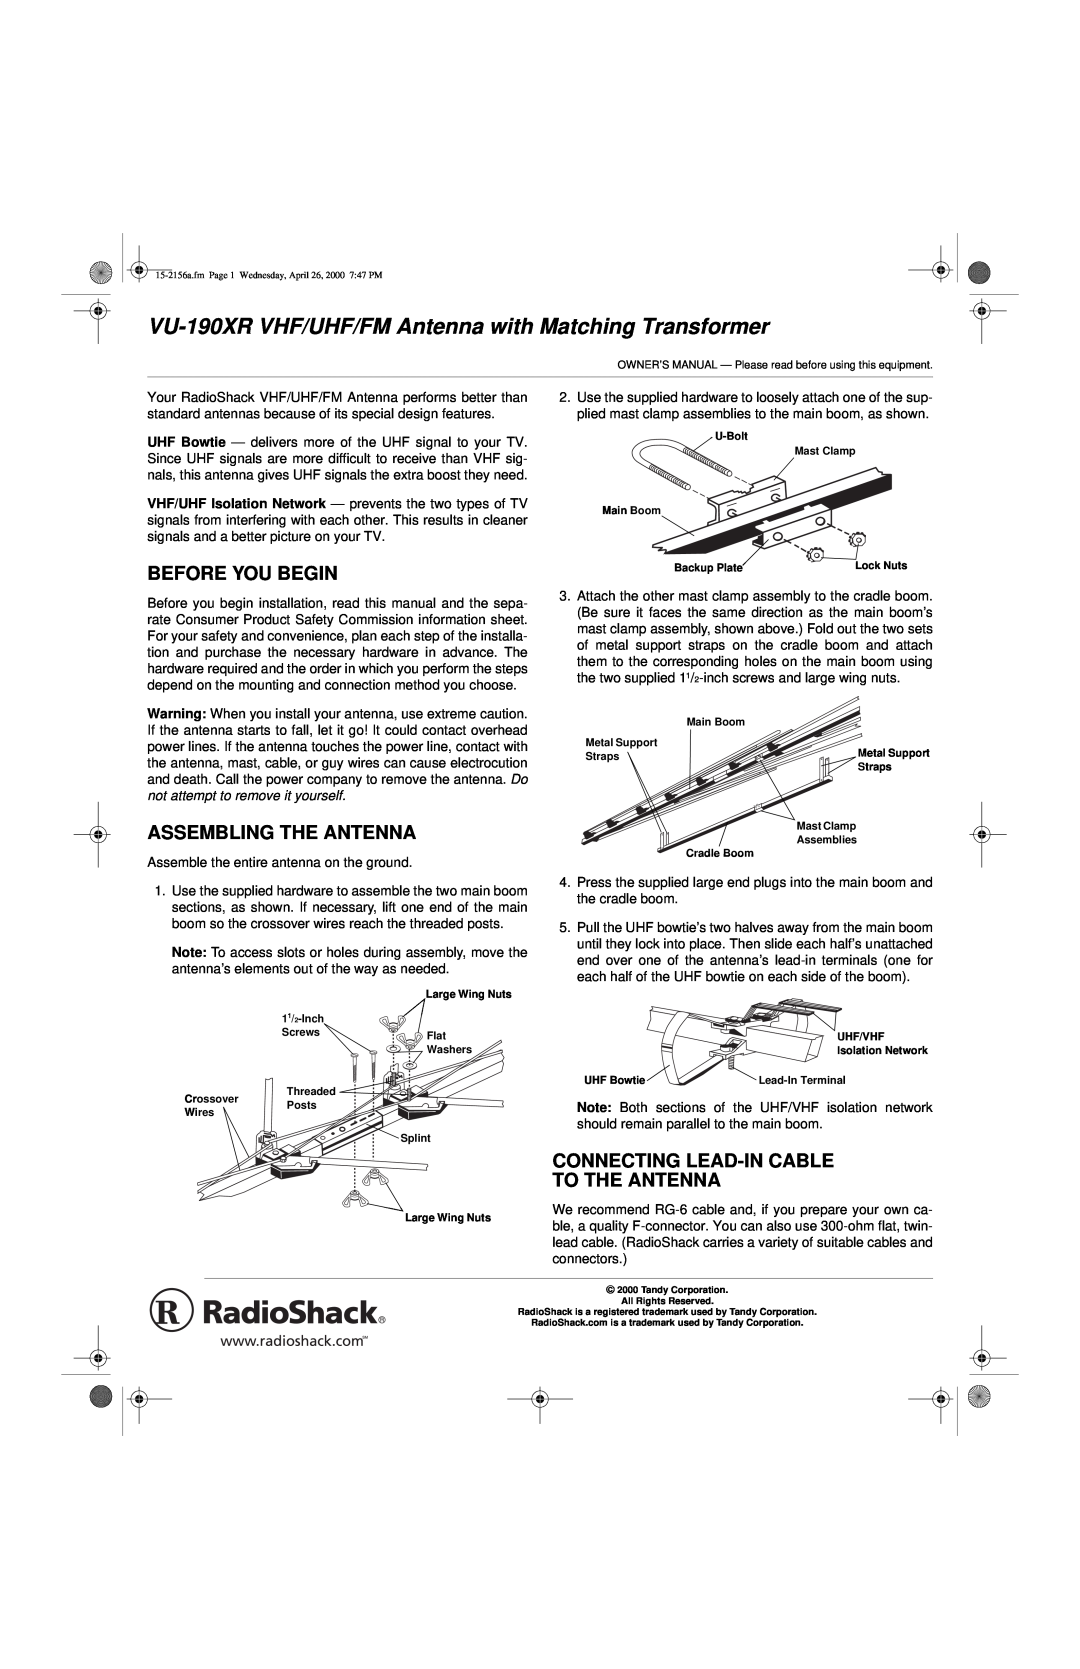 Radio Shack VU-190XR owner manual Before You Begin, Assembling The Antenna, Connecting Lead-Incable To The Antenna 